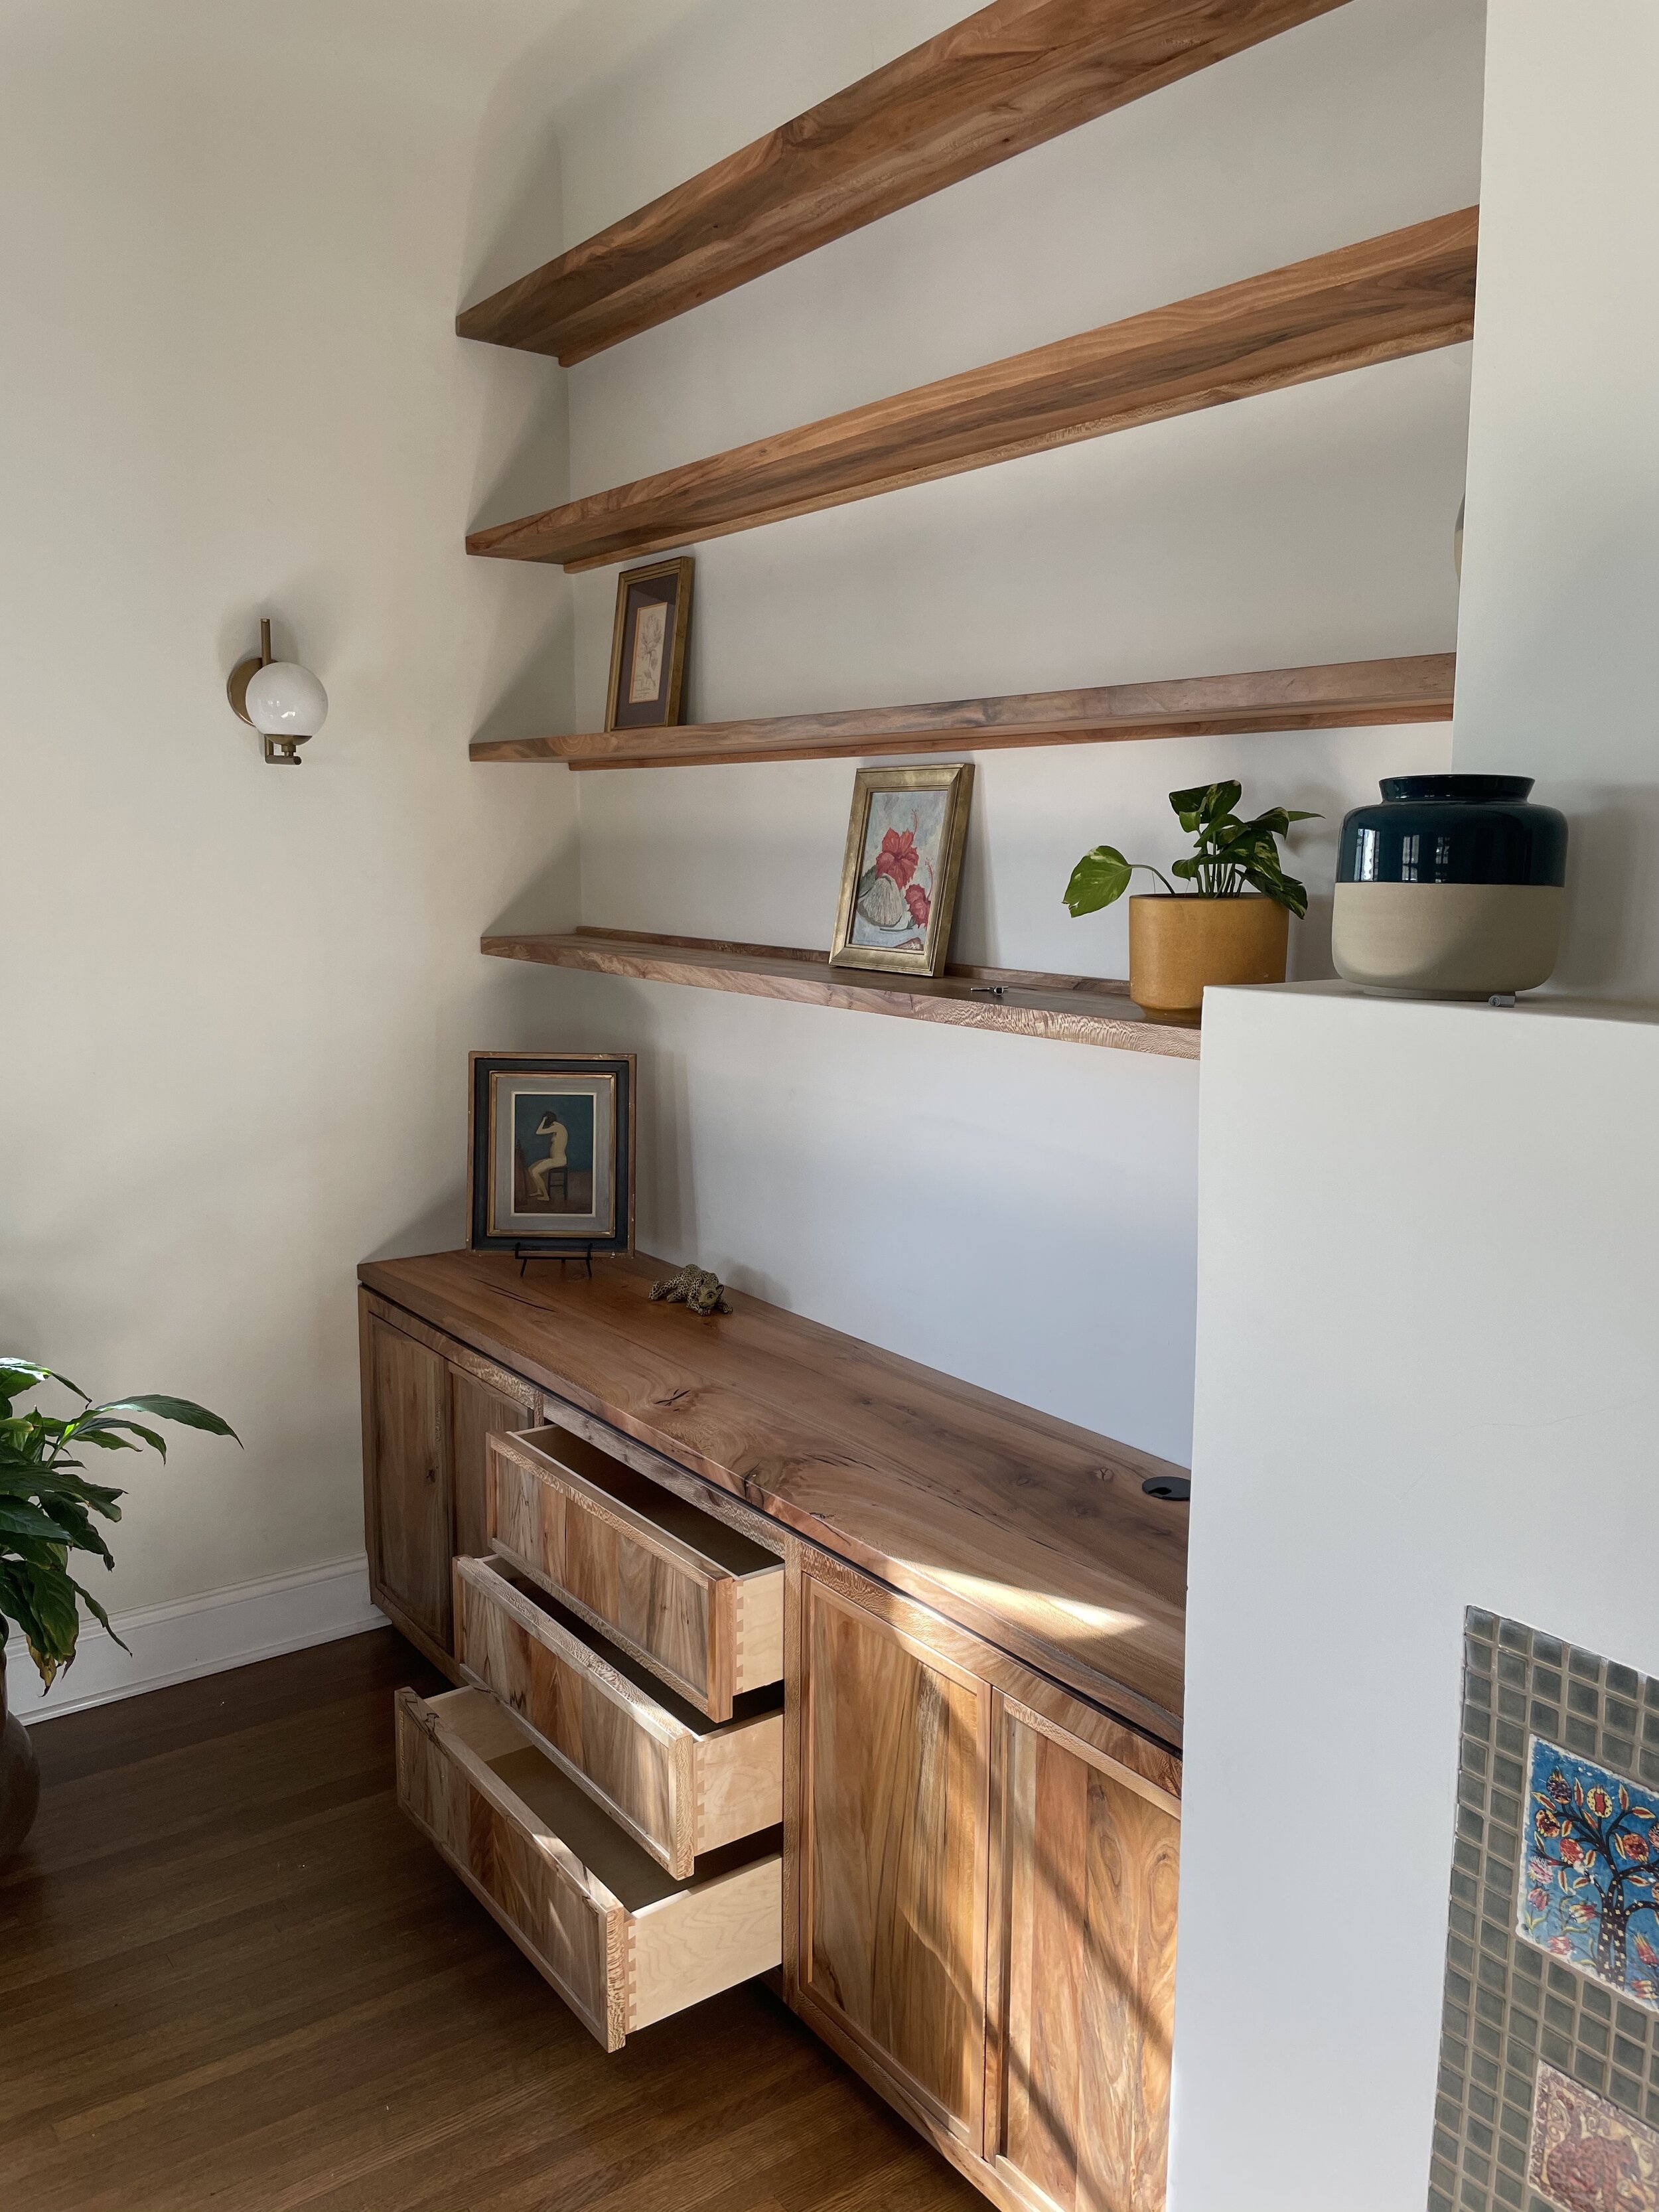 Sycamore Built In with Floating Shelves